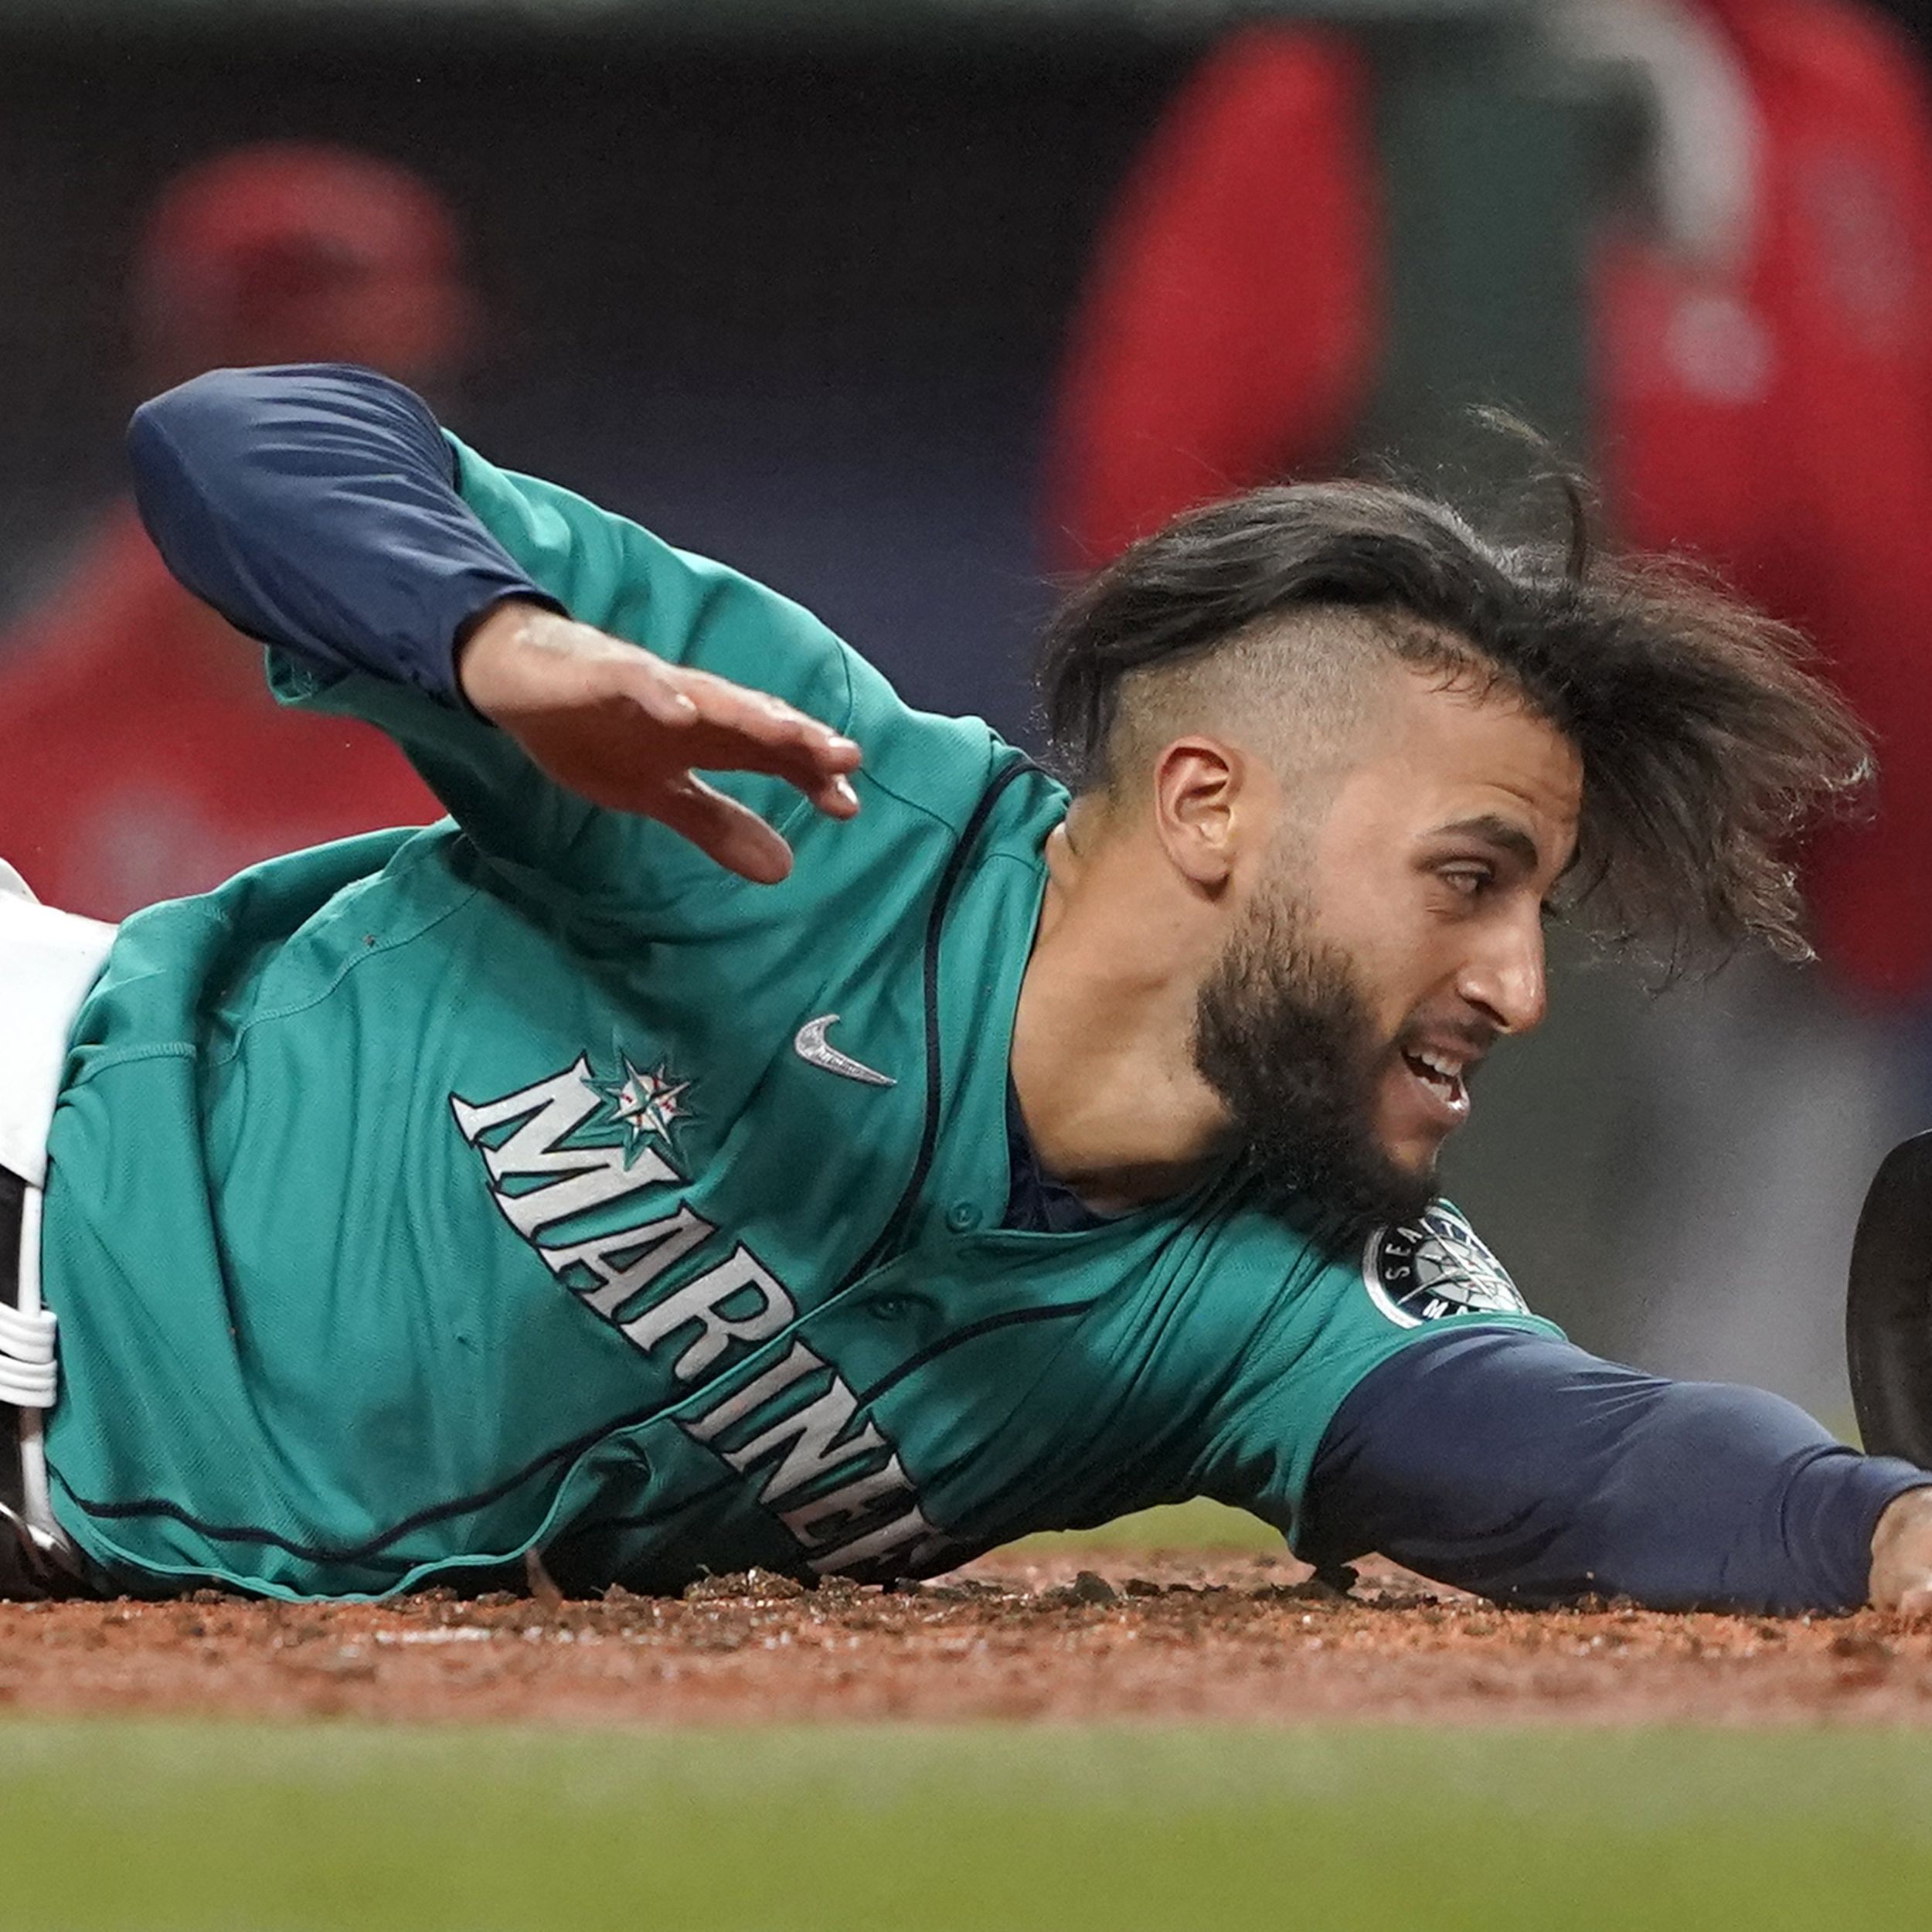 A Grip on Sports: When Toro and Moore come up big, Mariner fans say thanks  and wonder how an improbable win actually happened